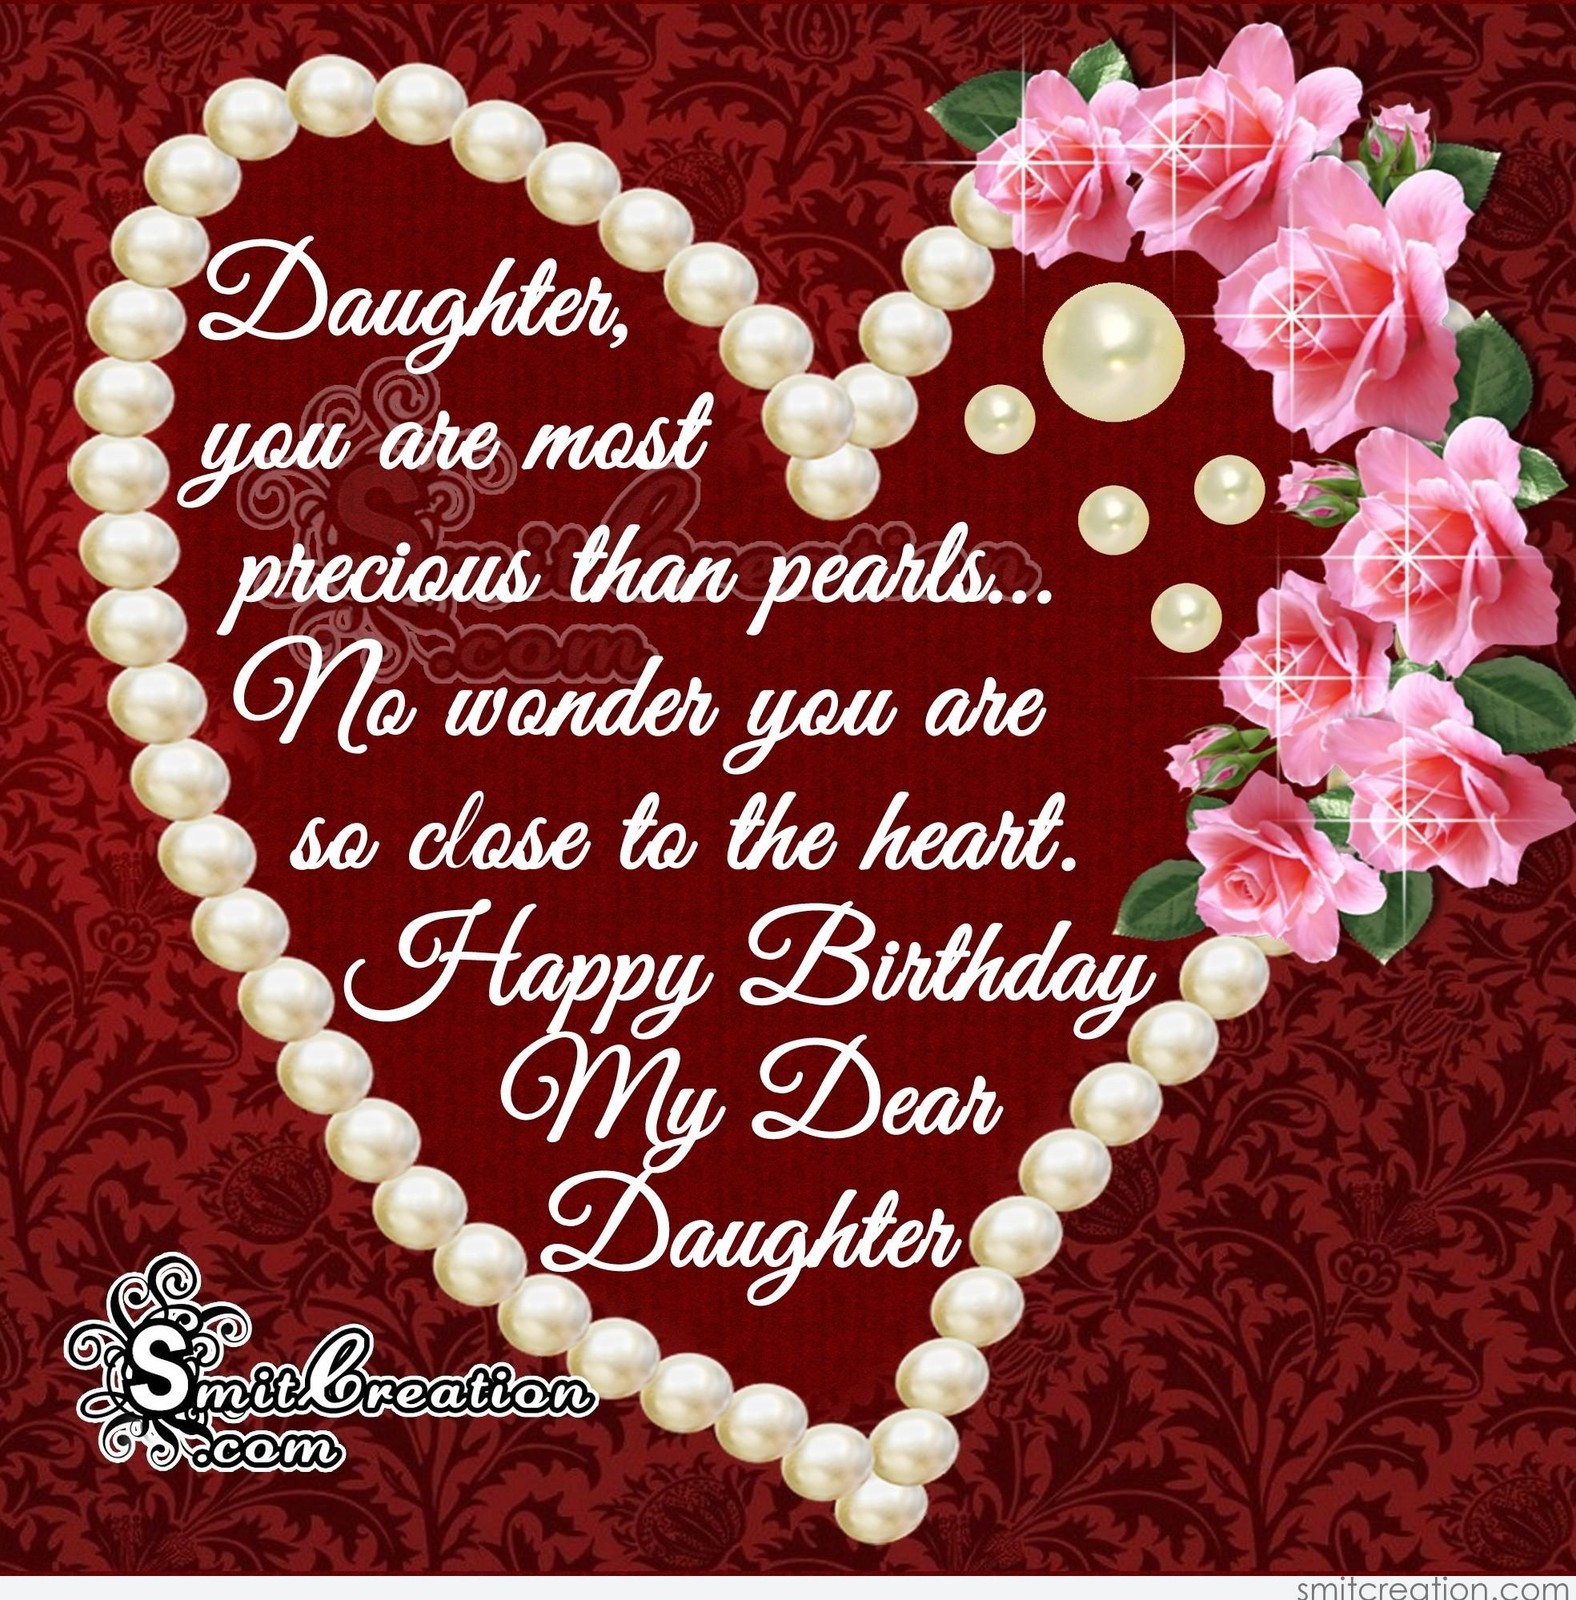 Happy birthday images For Daughter Free Beautiful bday cards and 